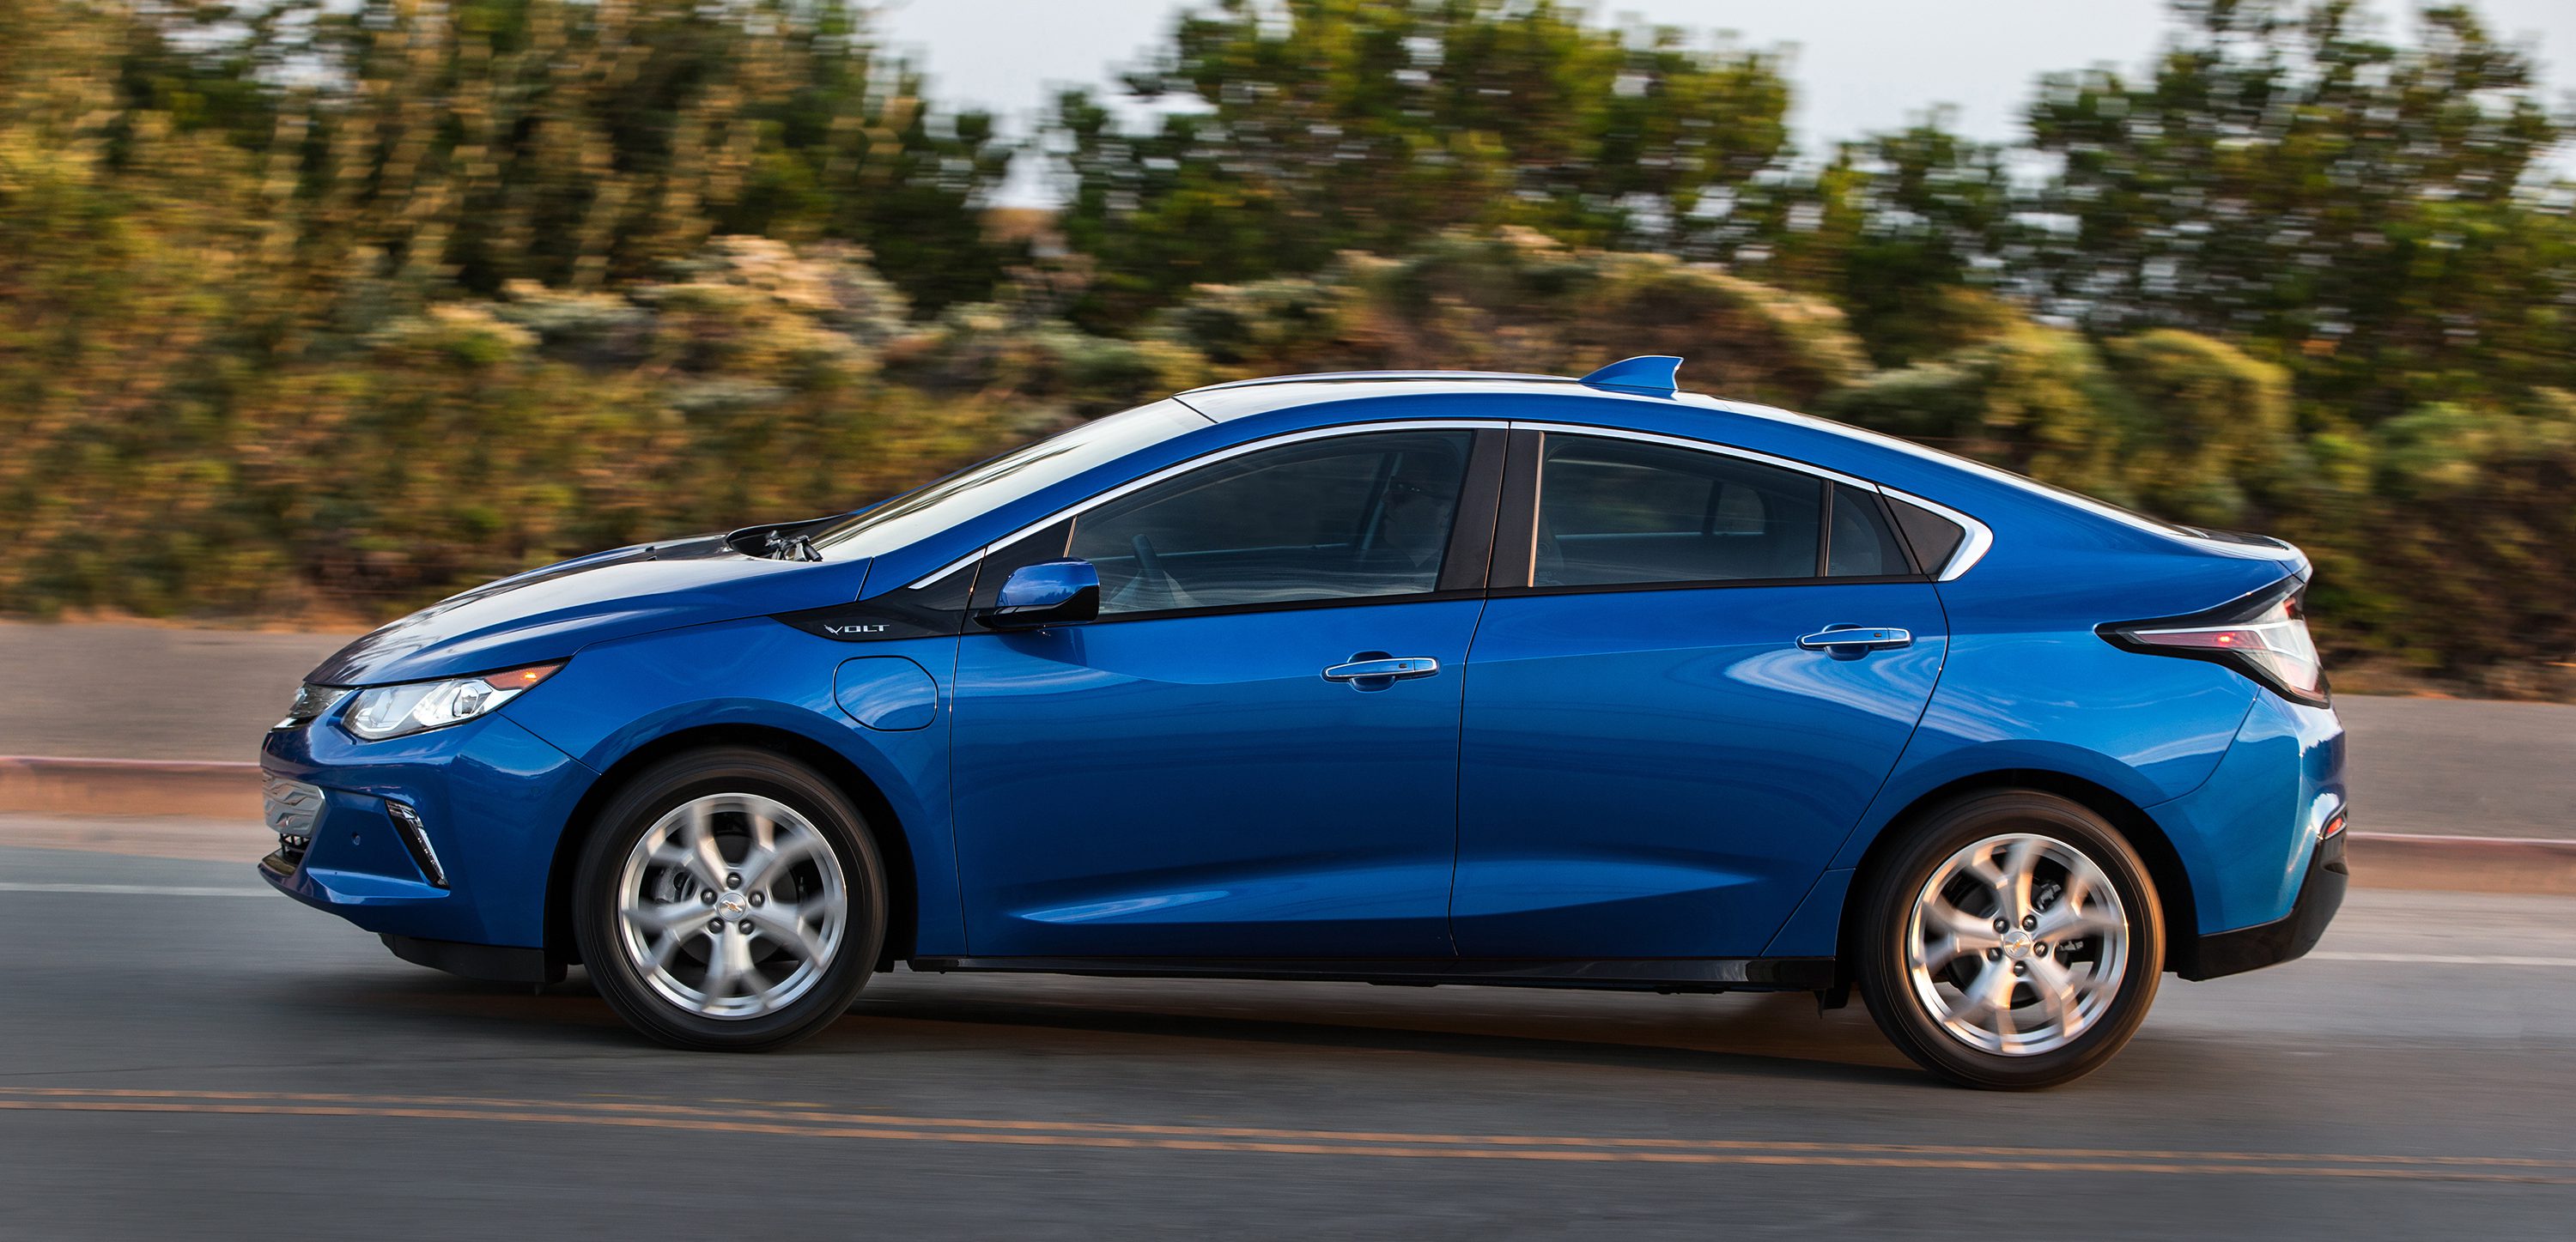 GM delivers 100,000th Chevy Volt in the US, fleet racked up 1.5 billion